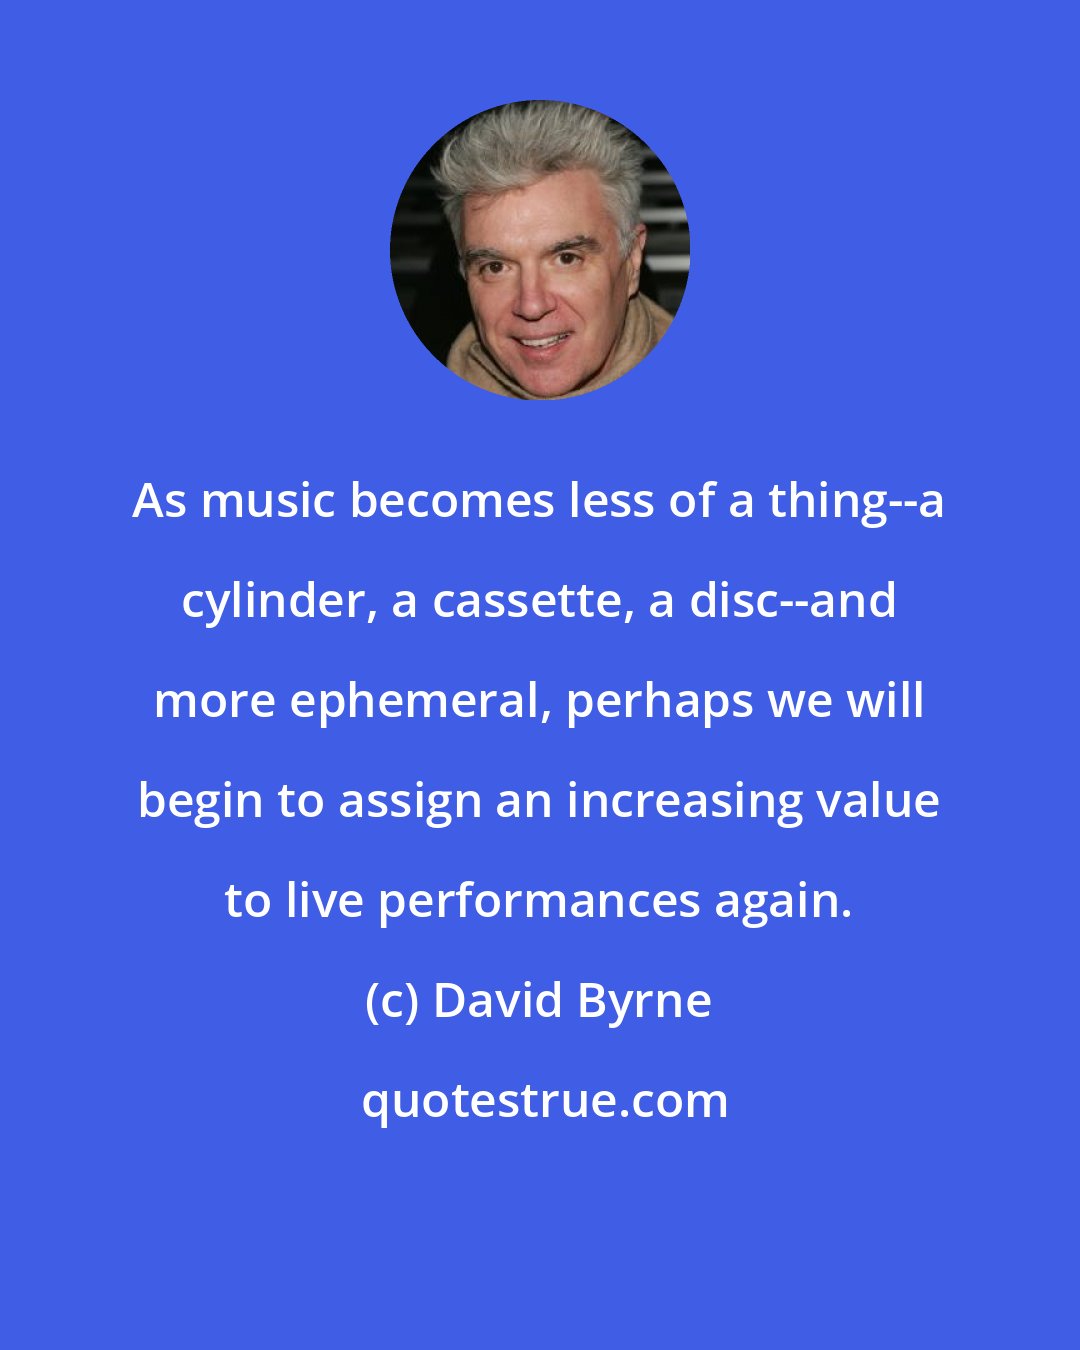 David Byrne: As music becomes less of a thing--a cylinder, a cassette, a disc--and more ephemeral, perhaps we will begin to assign an increasing value to live performances again.